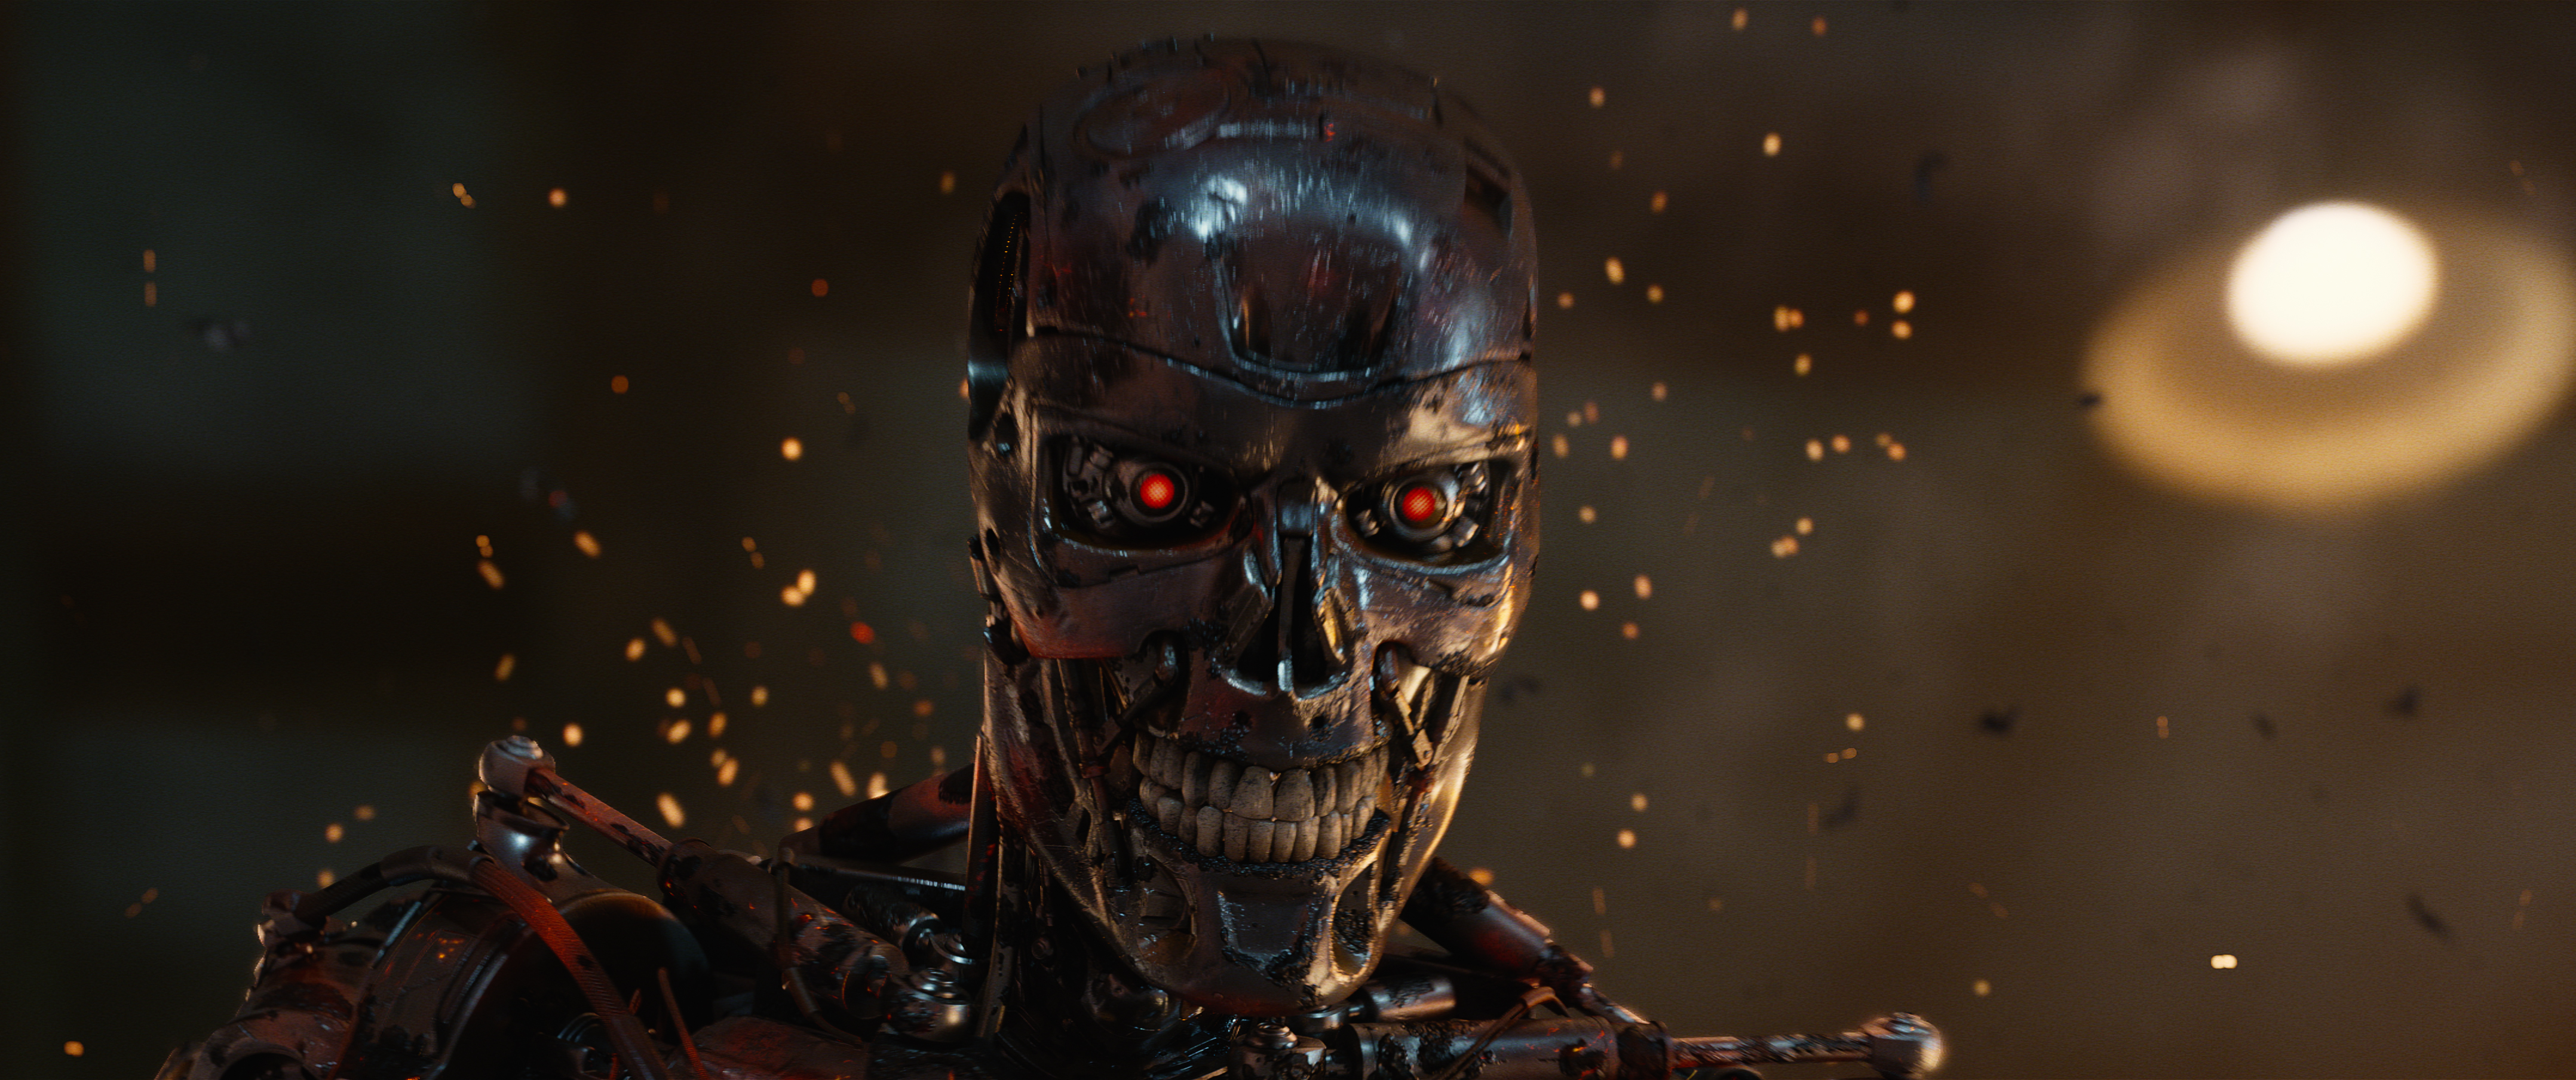 Terminator Genisys' Gallery: Over 80 Hi-Res Images! - Bloody Disgusting